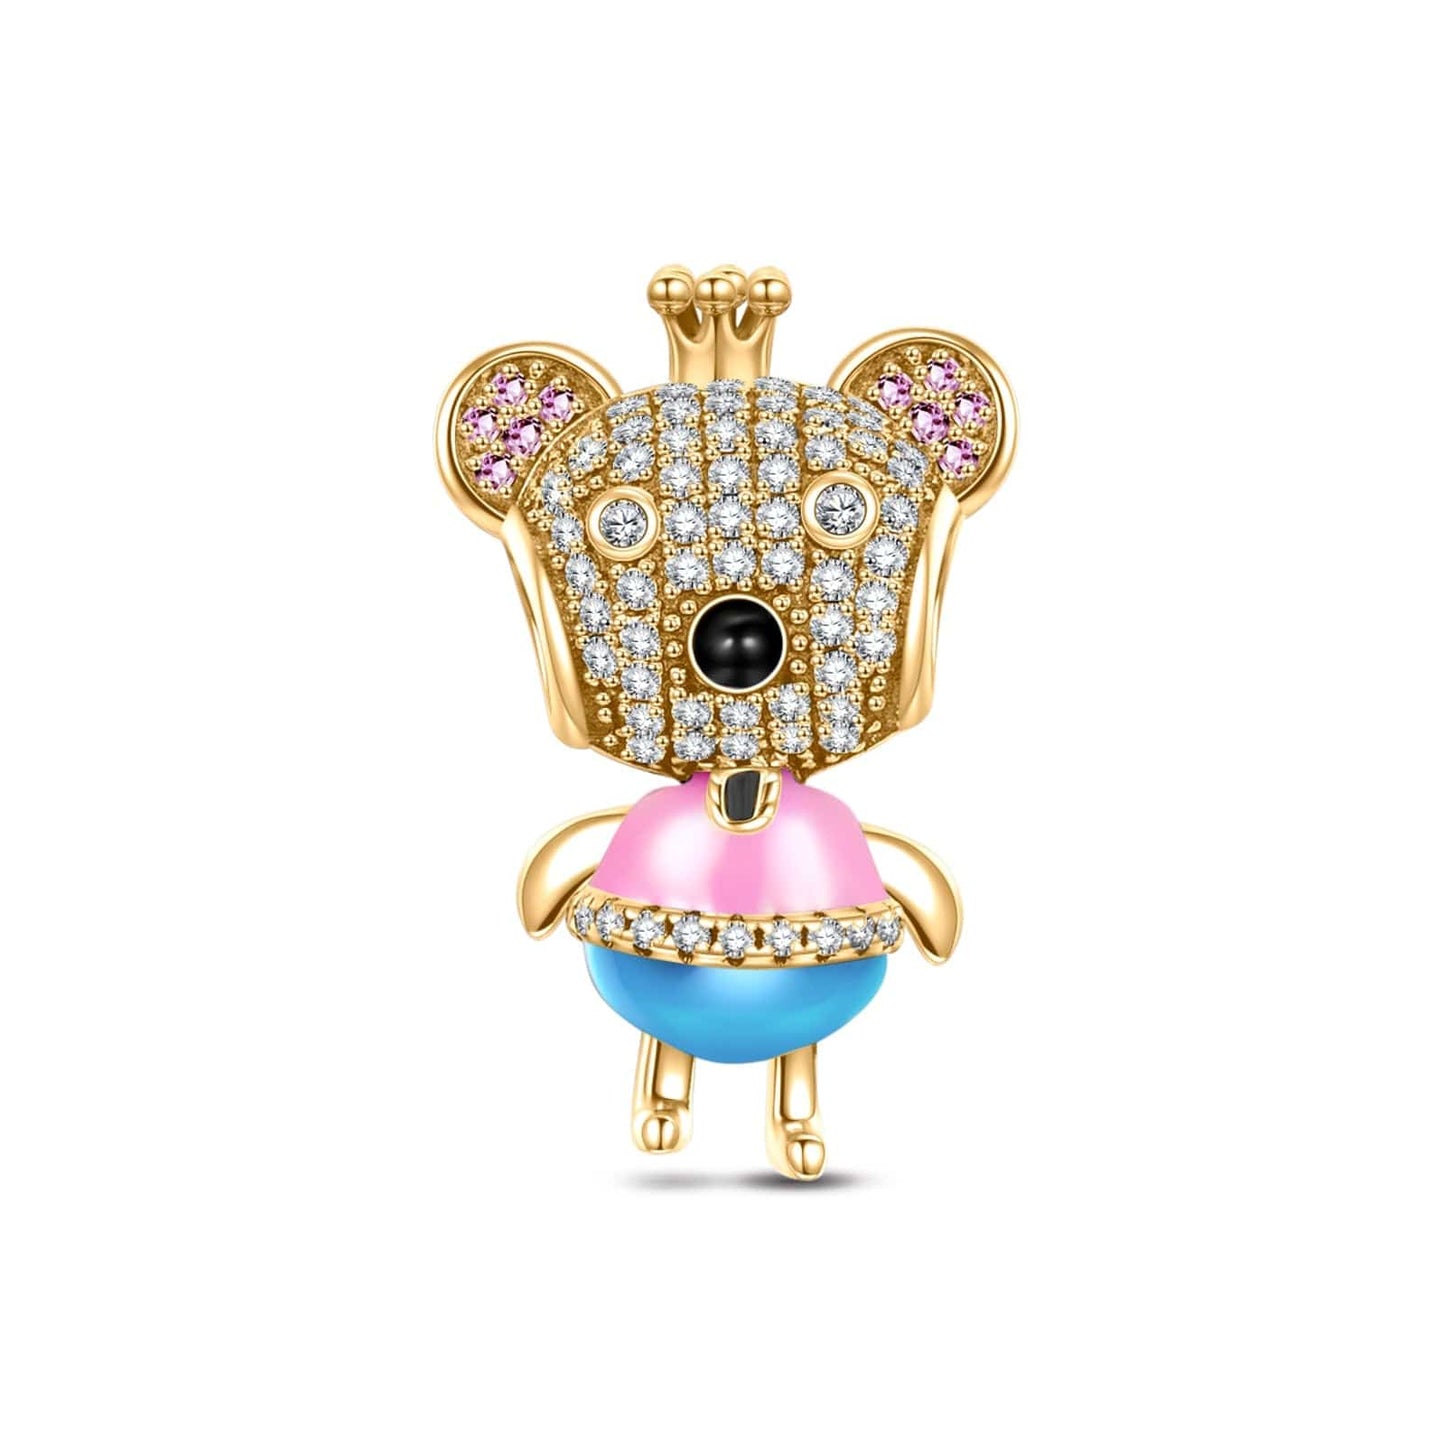 Princess Bear Tarnish-resistant Silver Charms With Enamel In 14K Gold Plated